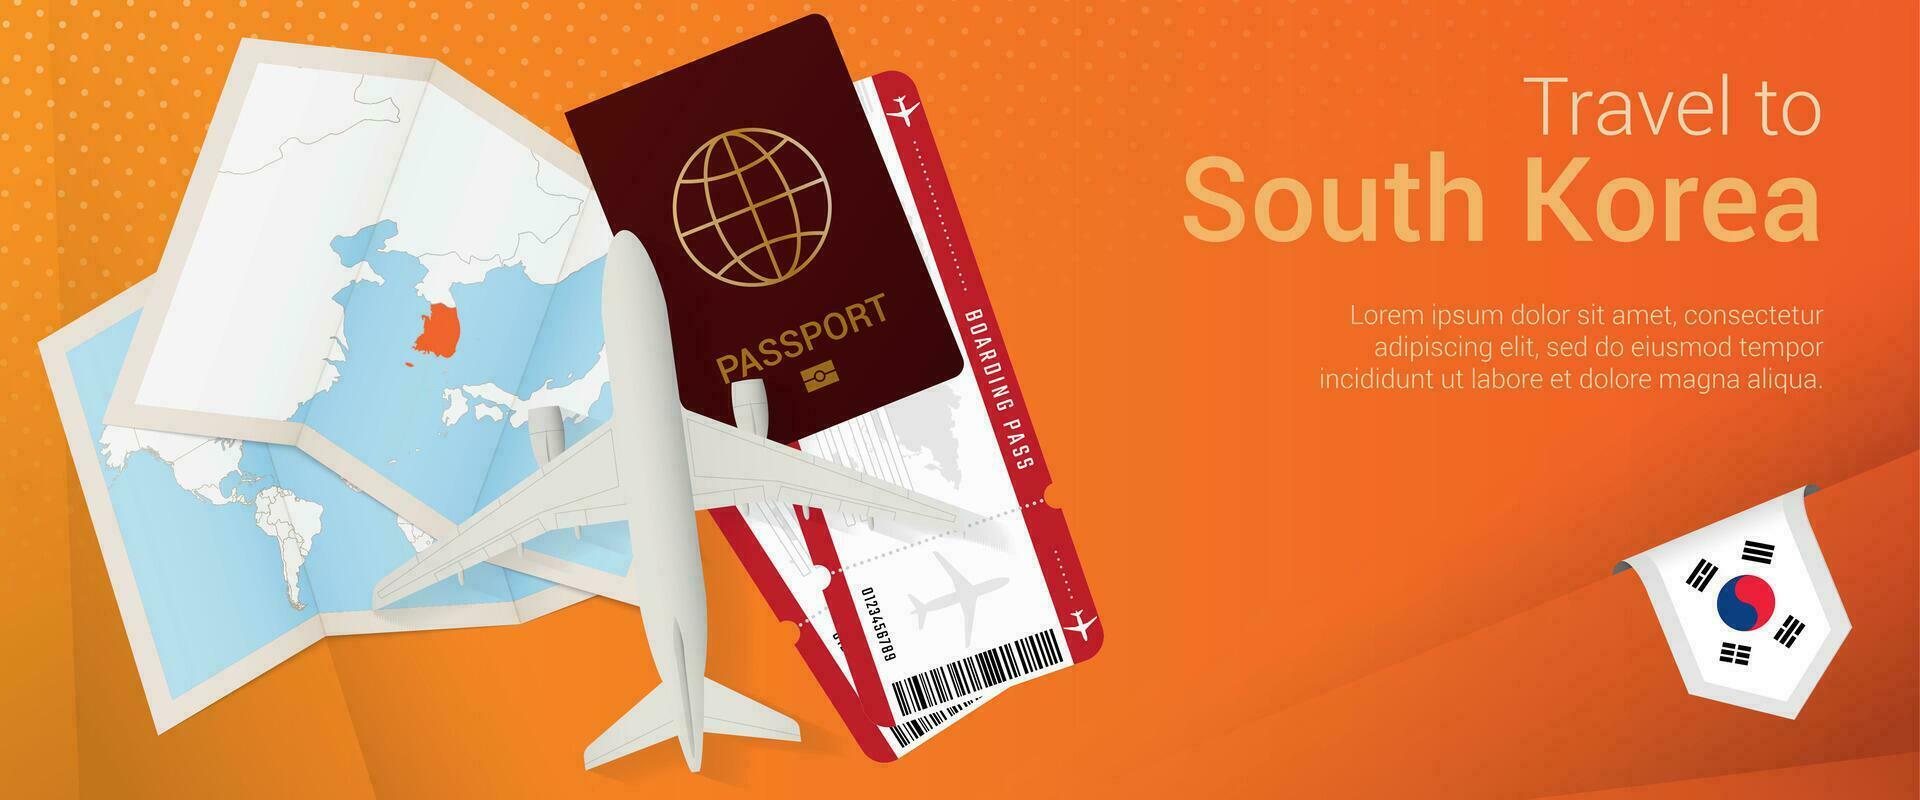 Travel to South Korea pop-under banner. Trip banner with passport, tickets, airplane, boarding pass, map and flag of South Korea. vector